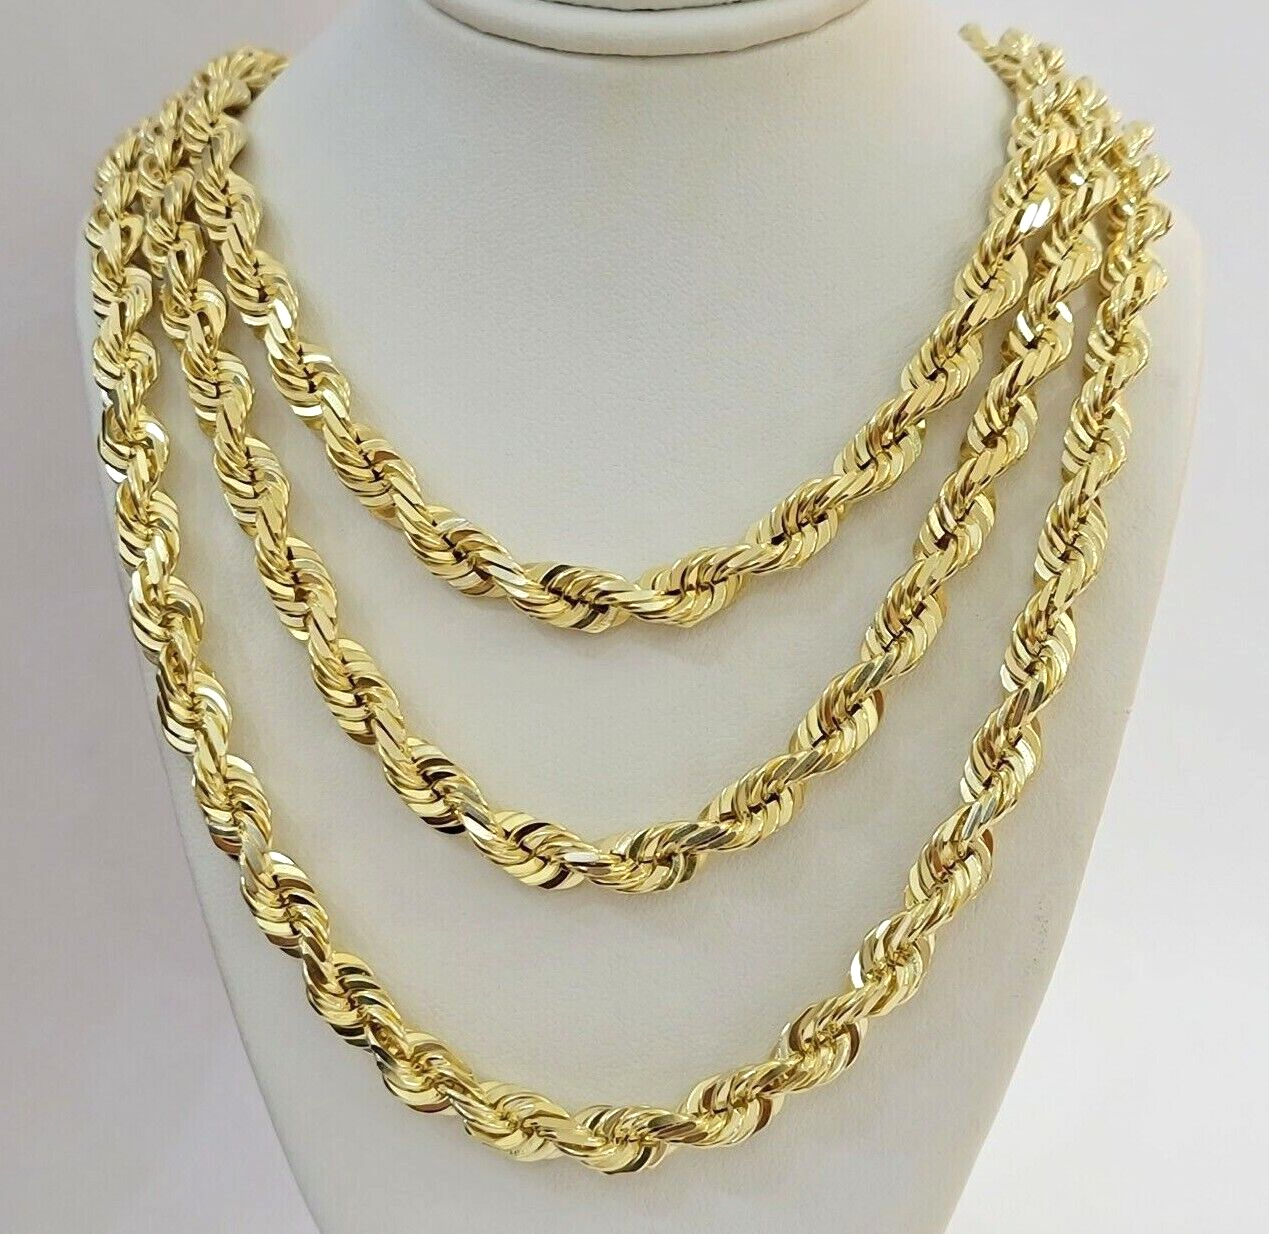 9mm Rope Chain Necklace 10k Yellow Gold 24" Inch Diamond Cuts Solid REAL 10KT